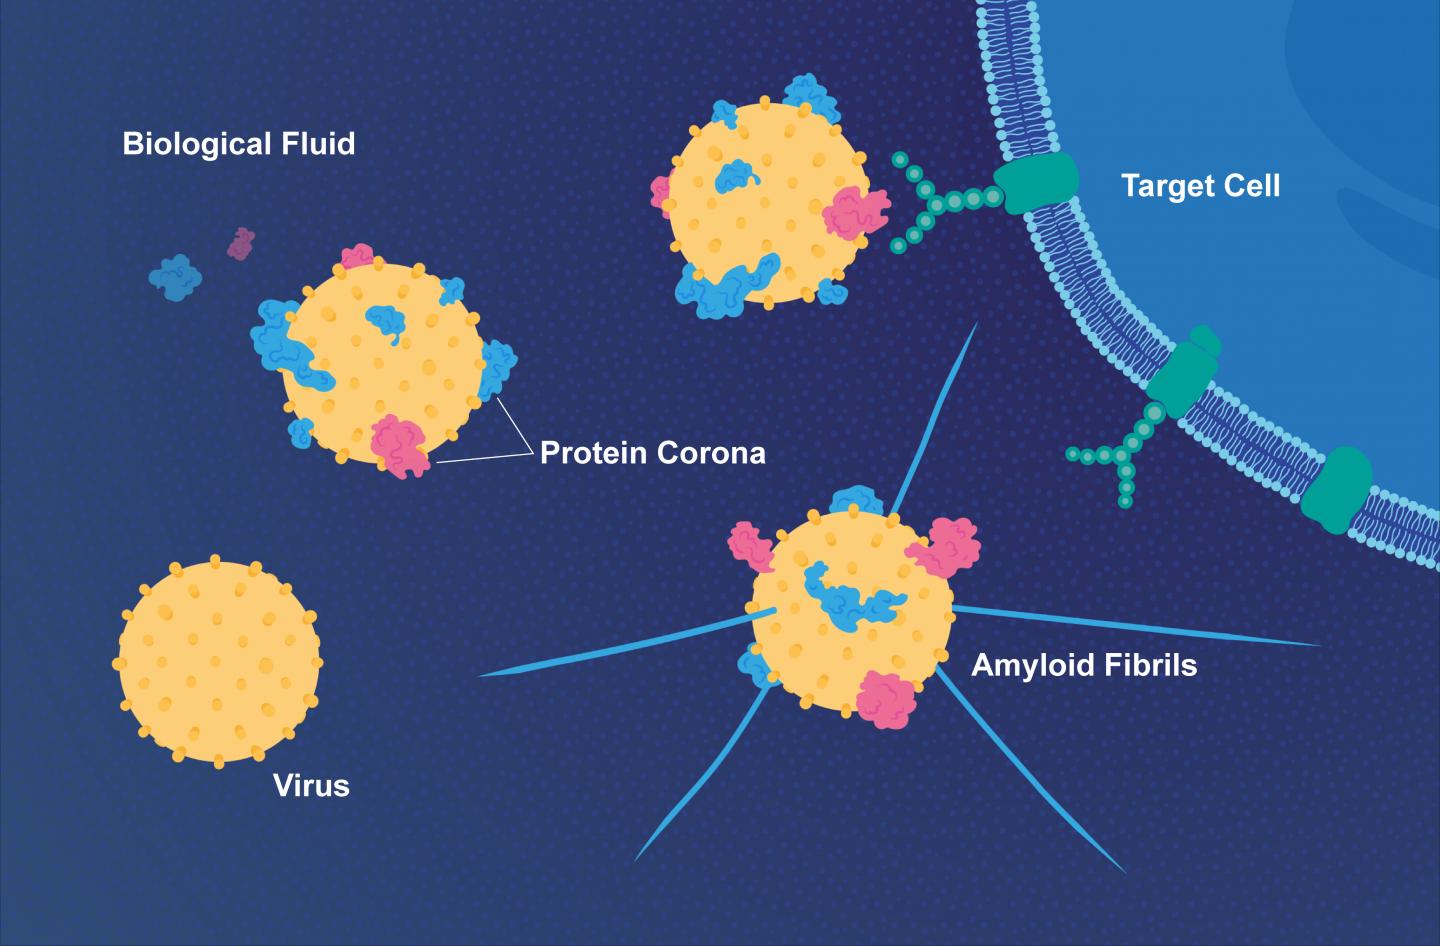 Proteins in the Fluid Surrounding the Target Cell Bind to a Virus and Form a Protein Corona